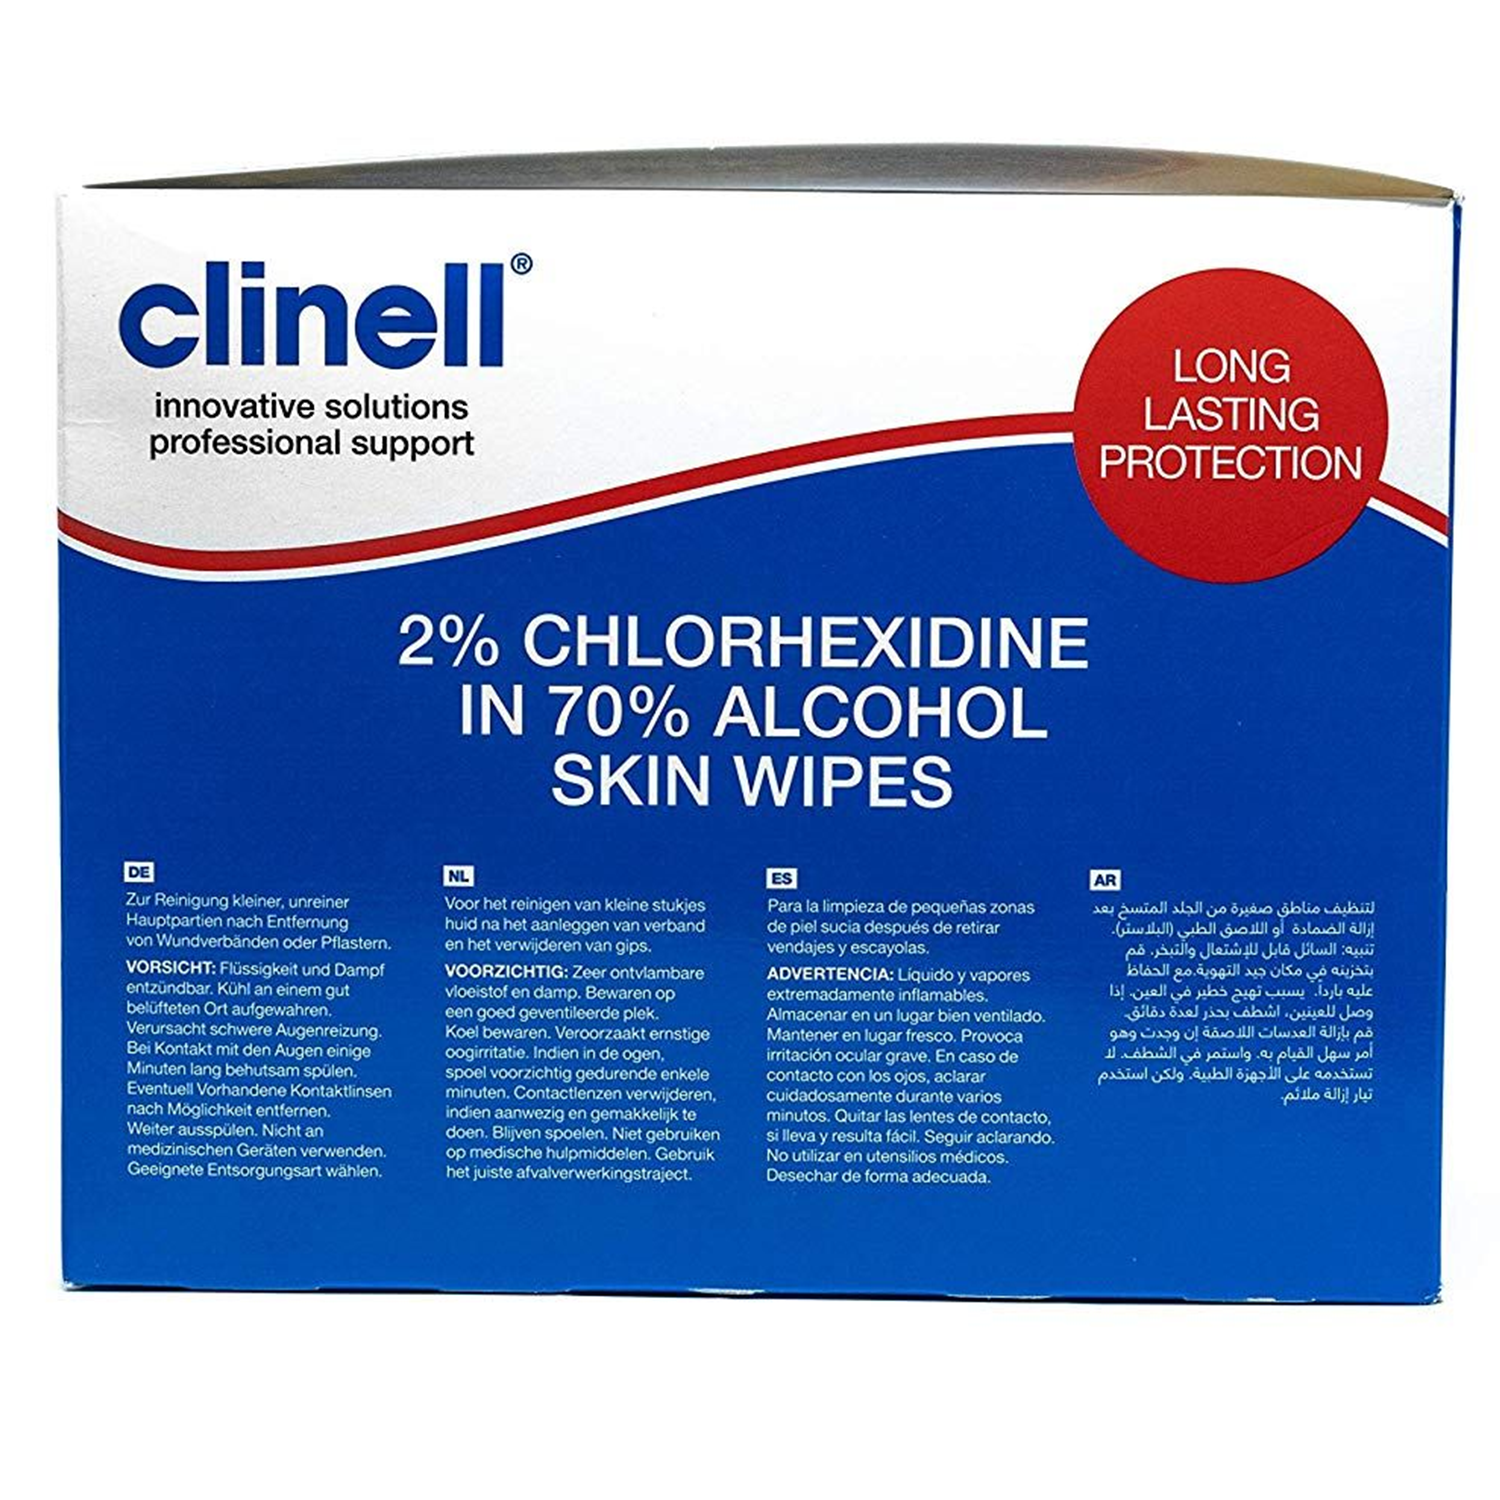 Clinell 70% Alcohol Skin Wipes Sachets | Pack of 200 (1)